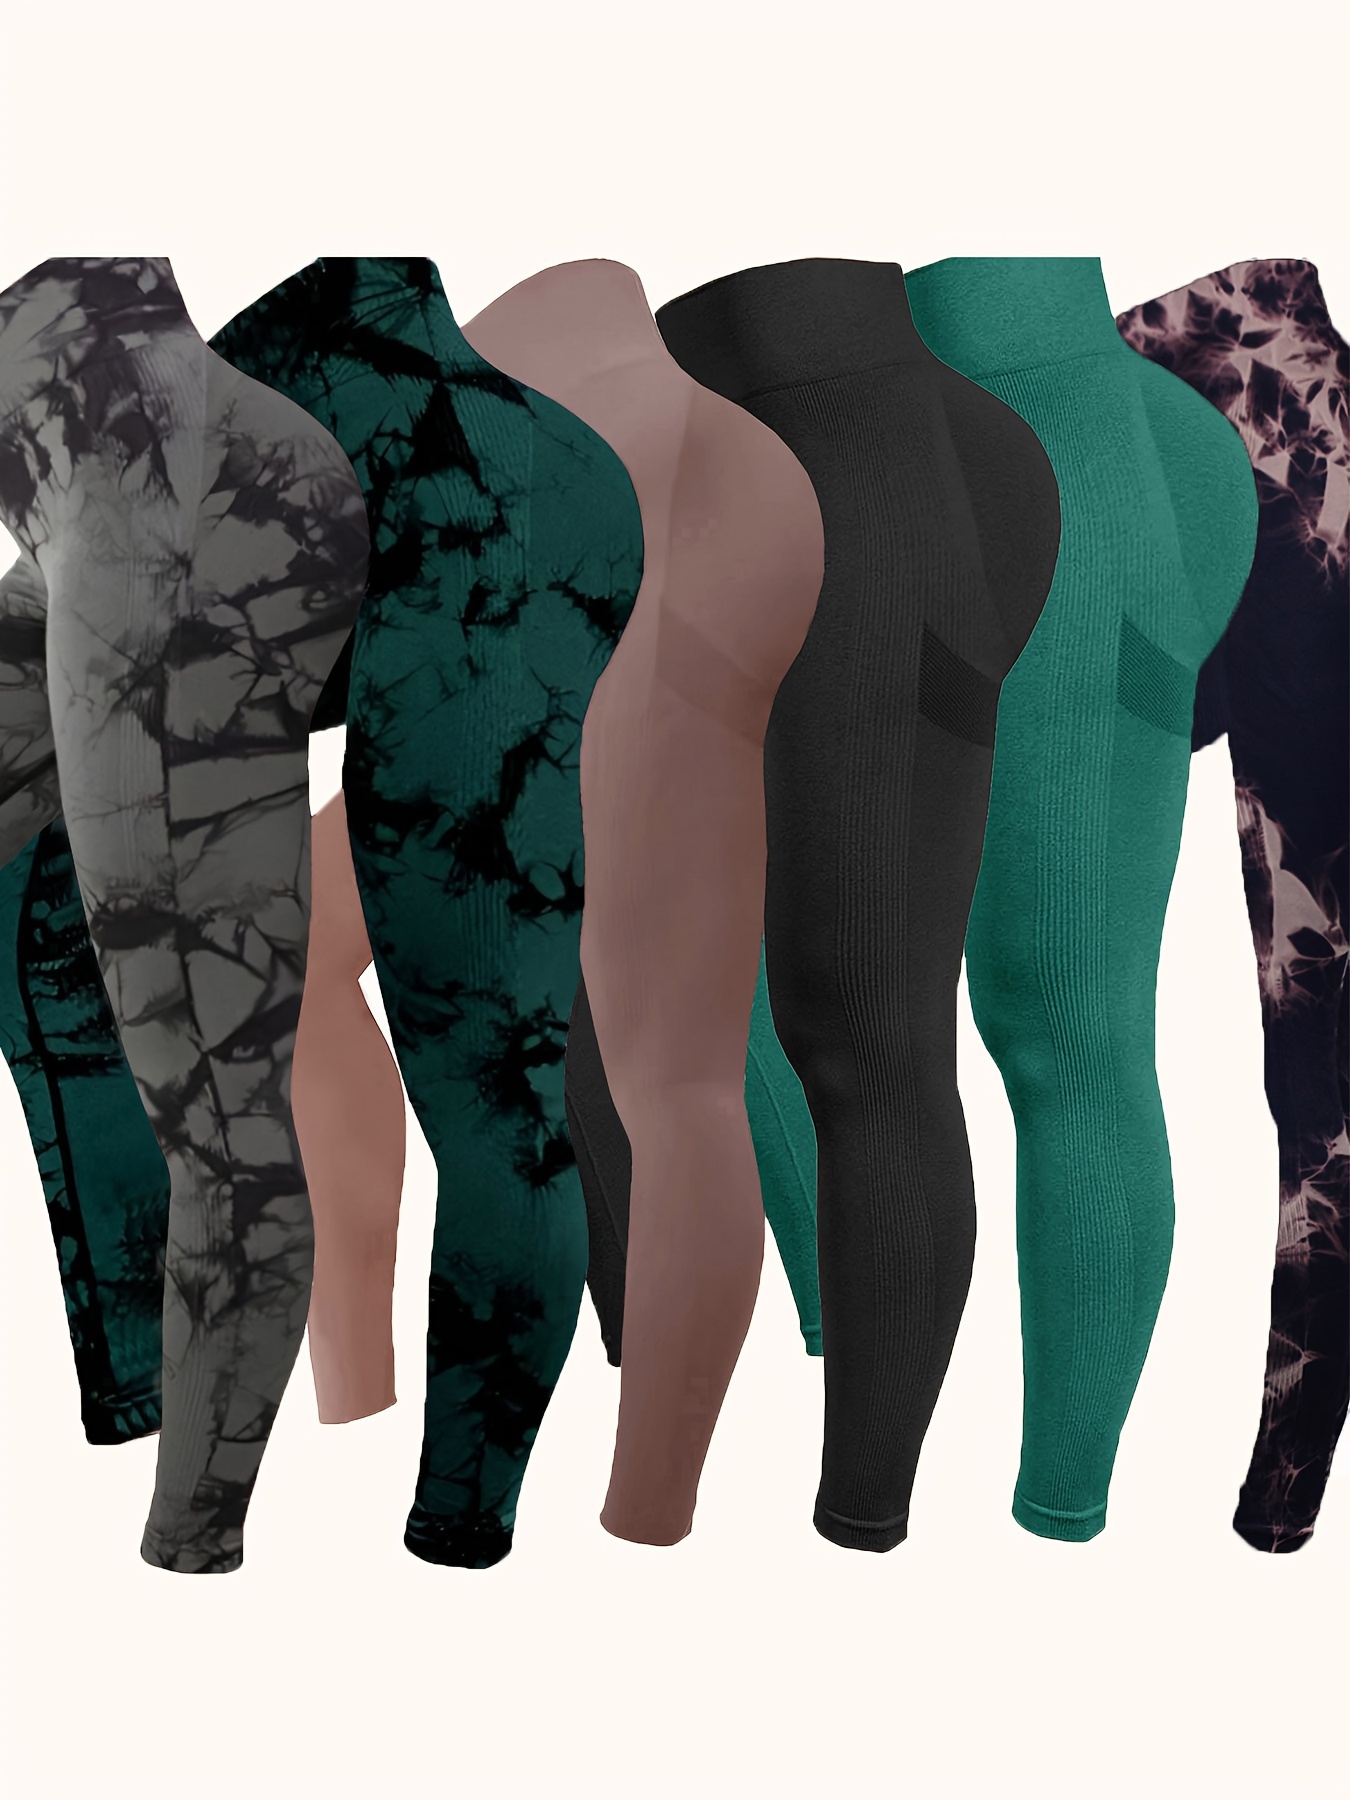 American Eagle Aerie Athletic Camo Highwaist Leggings active, sports,  running, gym, workout, zumba, yoga pants tights, Women's Fashion,  Activewear on Carousell